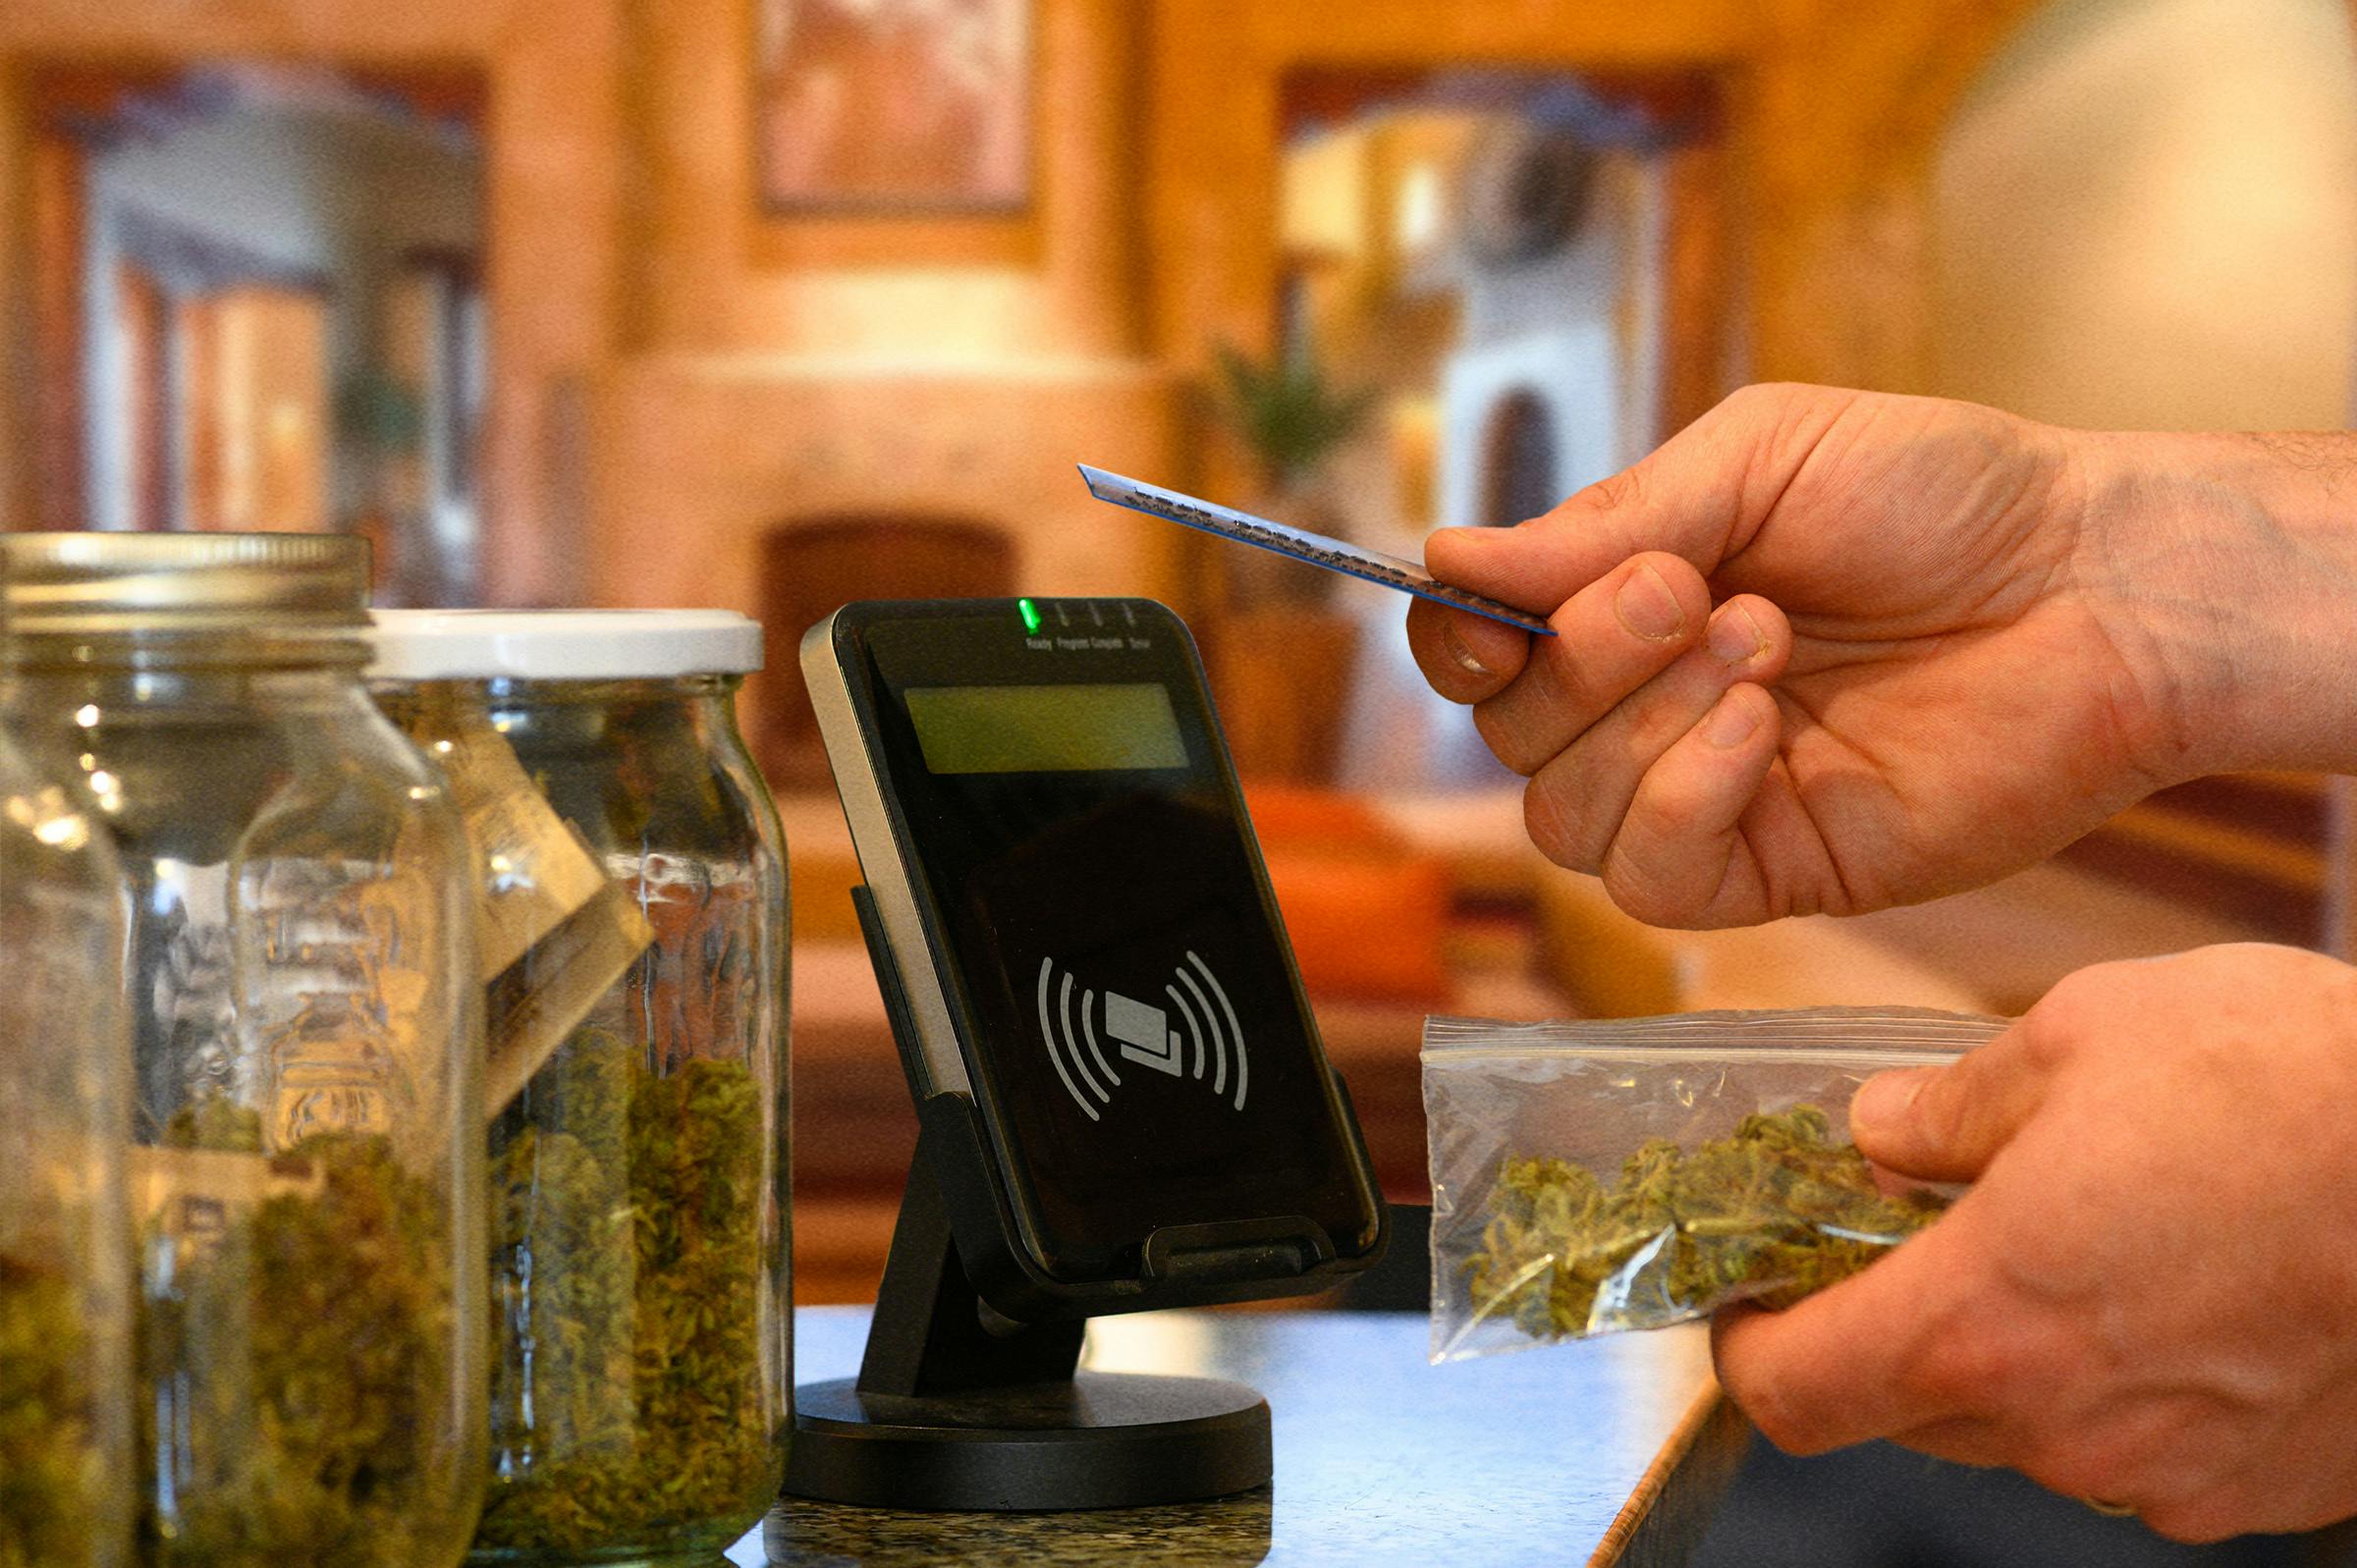 A hand is using a credit card to purchase cannabis at a dispensary